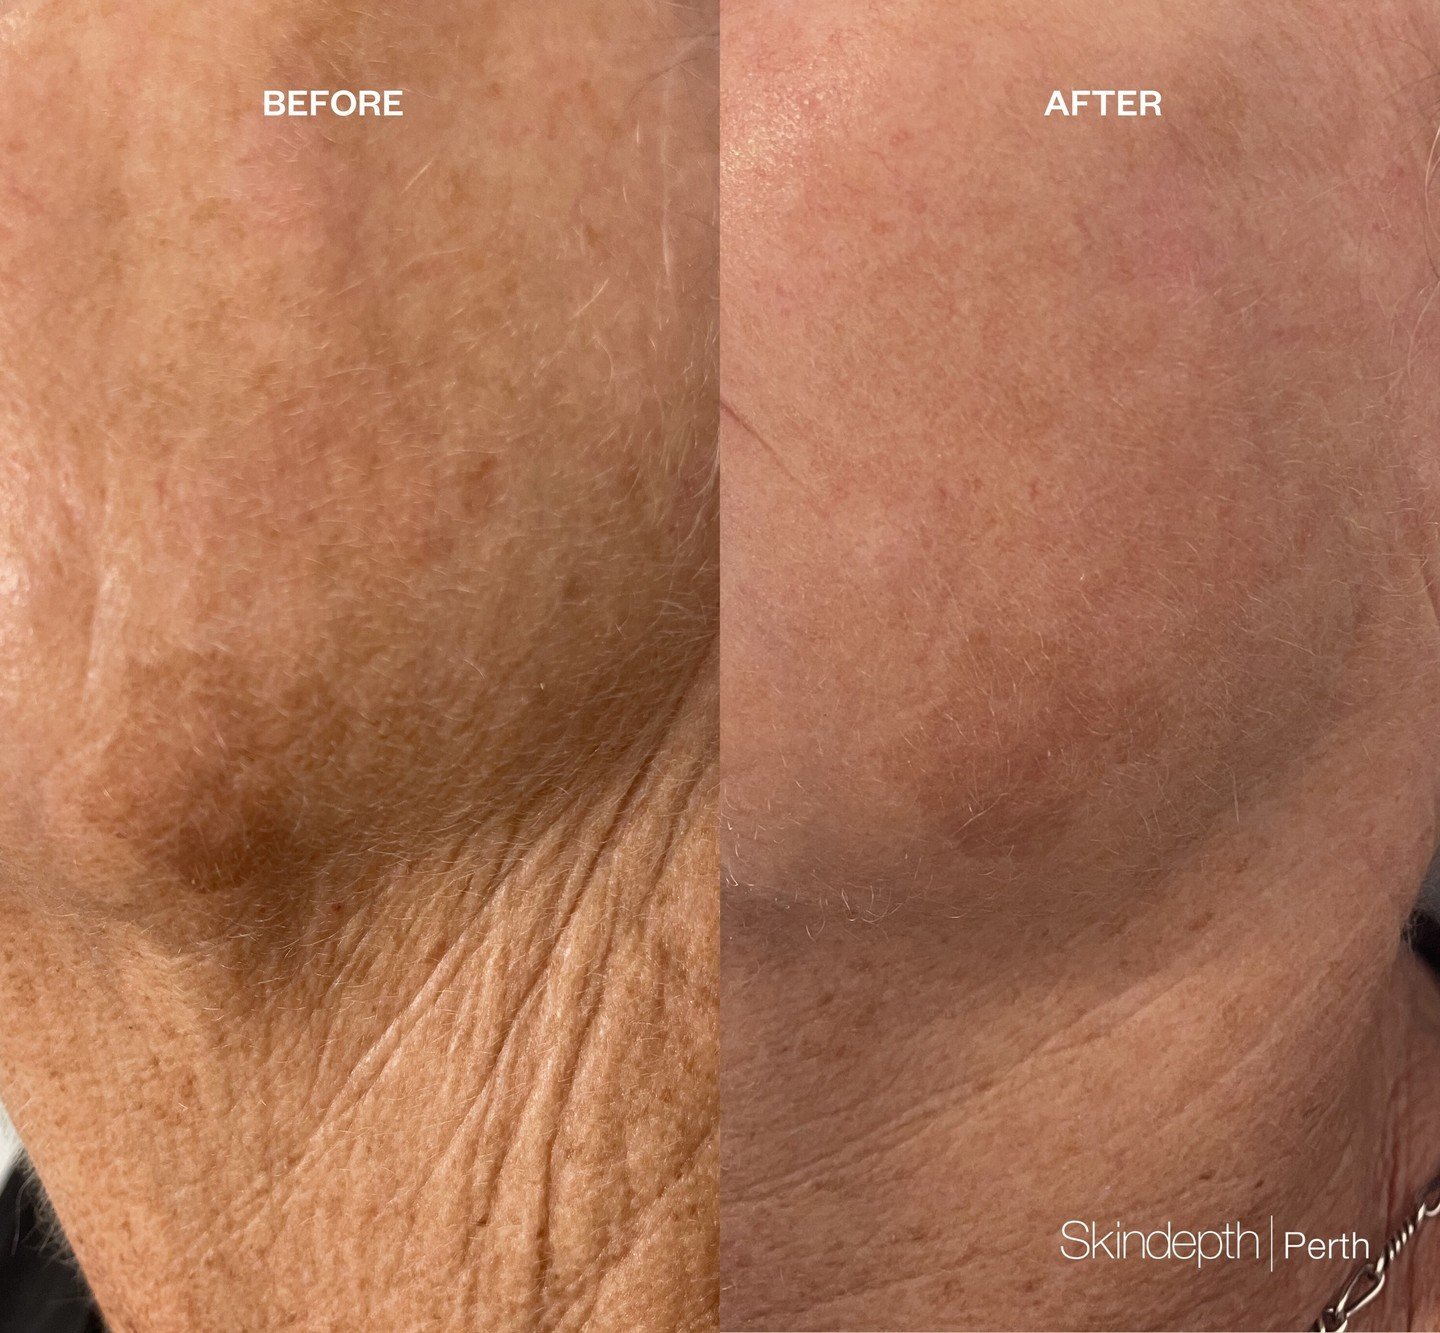 Pigmentation be gone 🪄 Incredible results by our @skindepth_perth team ⁠
⁠
Skin concerns: Skin tone / pigmentation⁠
Treatments: 3 sessions of IPL for pigmentation and updated at home regime including vitamin A and skin lightening serum. ⁠
⁠
Before i